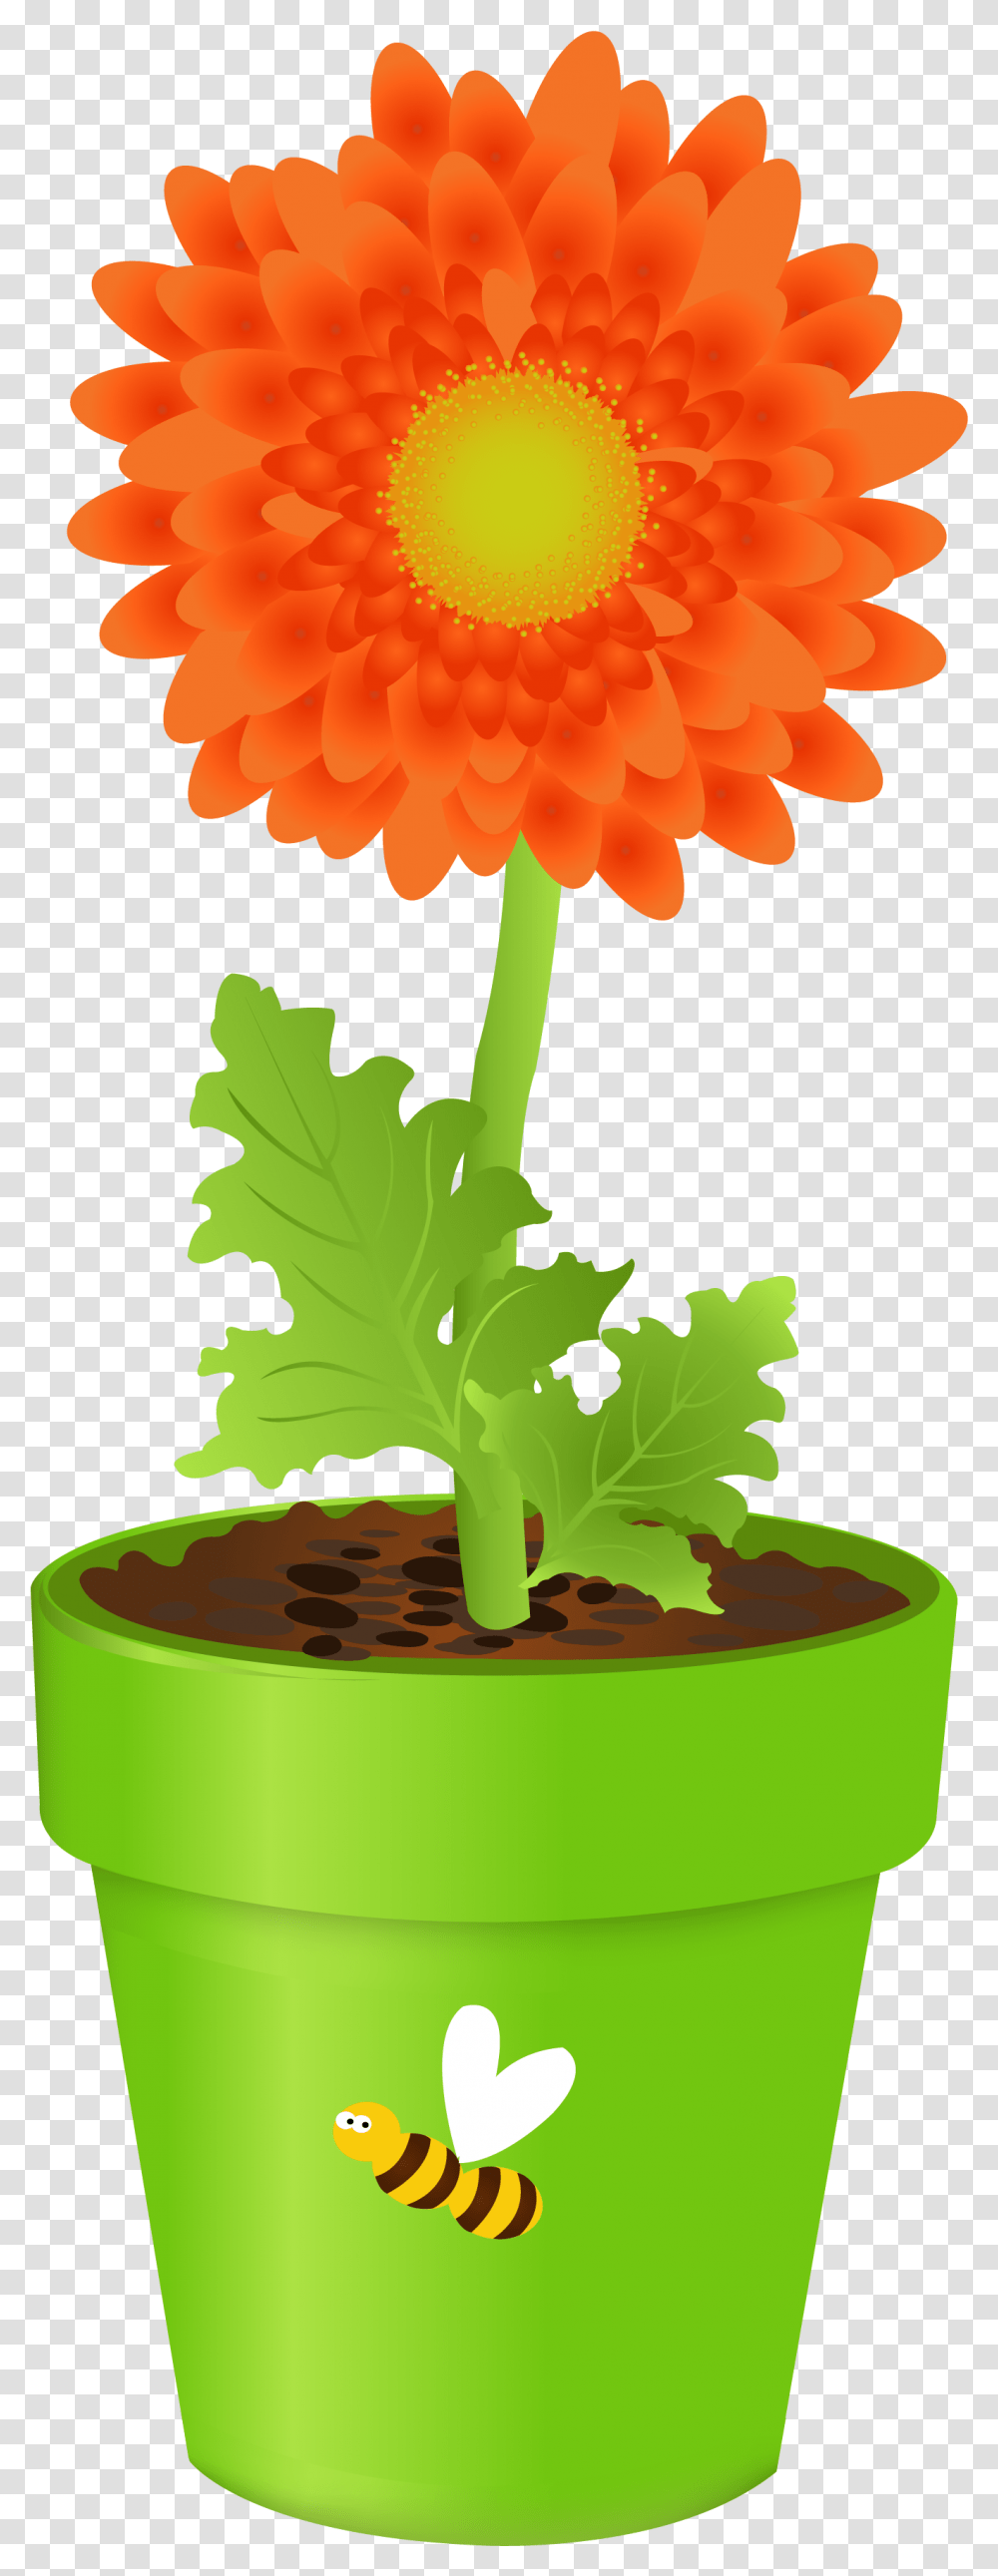 Library Of Svg Freeuse House Plant Files Clipart Flower Pots Clipart, Blossom, Daisy, Daisies, Dahlia Transparent Png